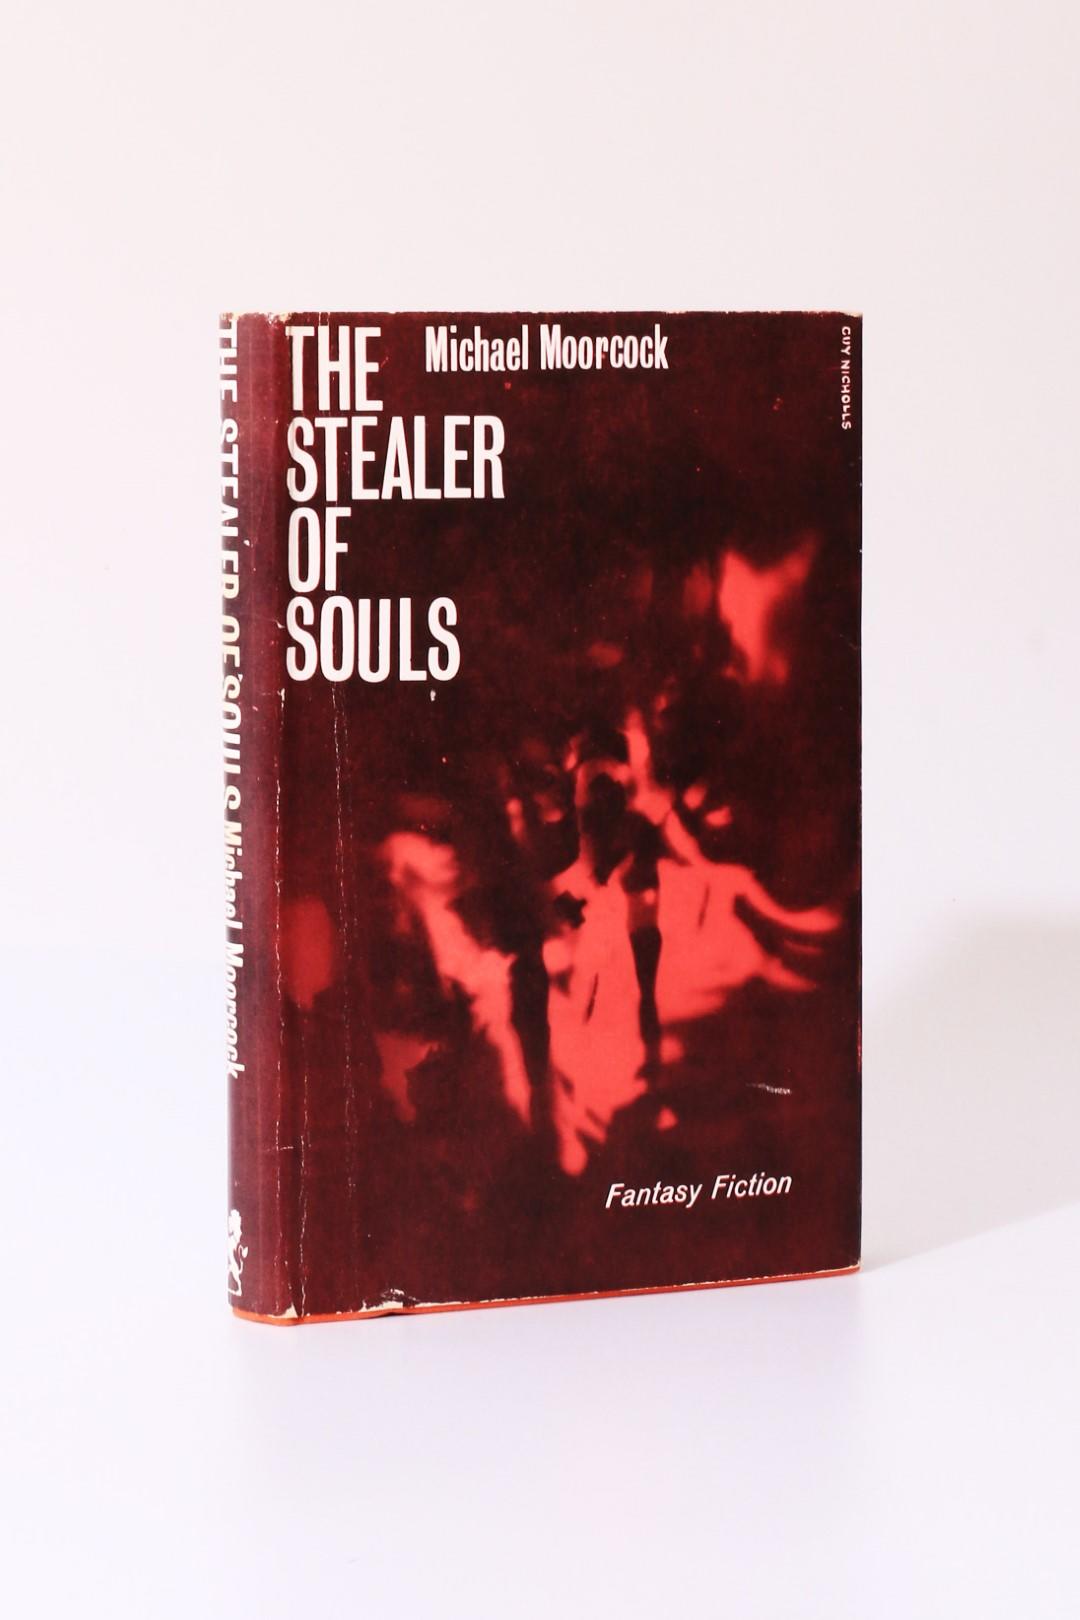 Michael Moorcock - The Stealer of Souls - Neville Spearman, 1963, First Edition.